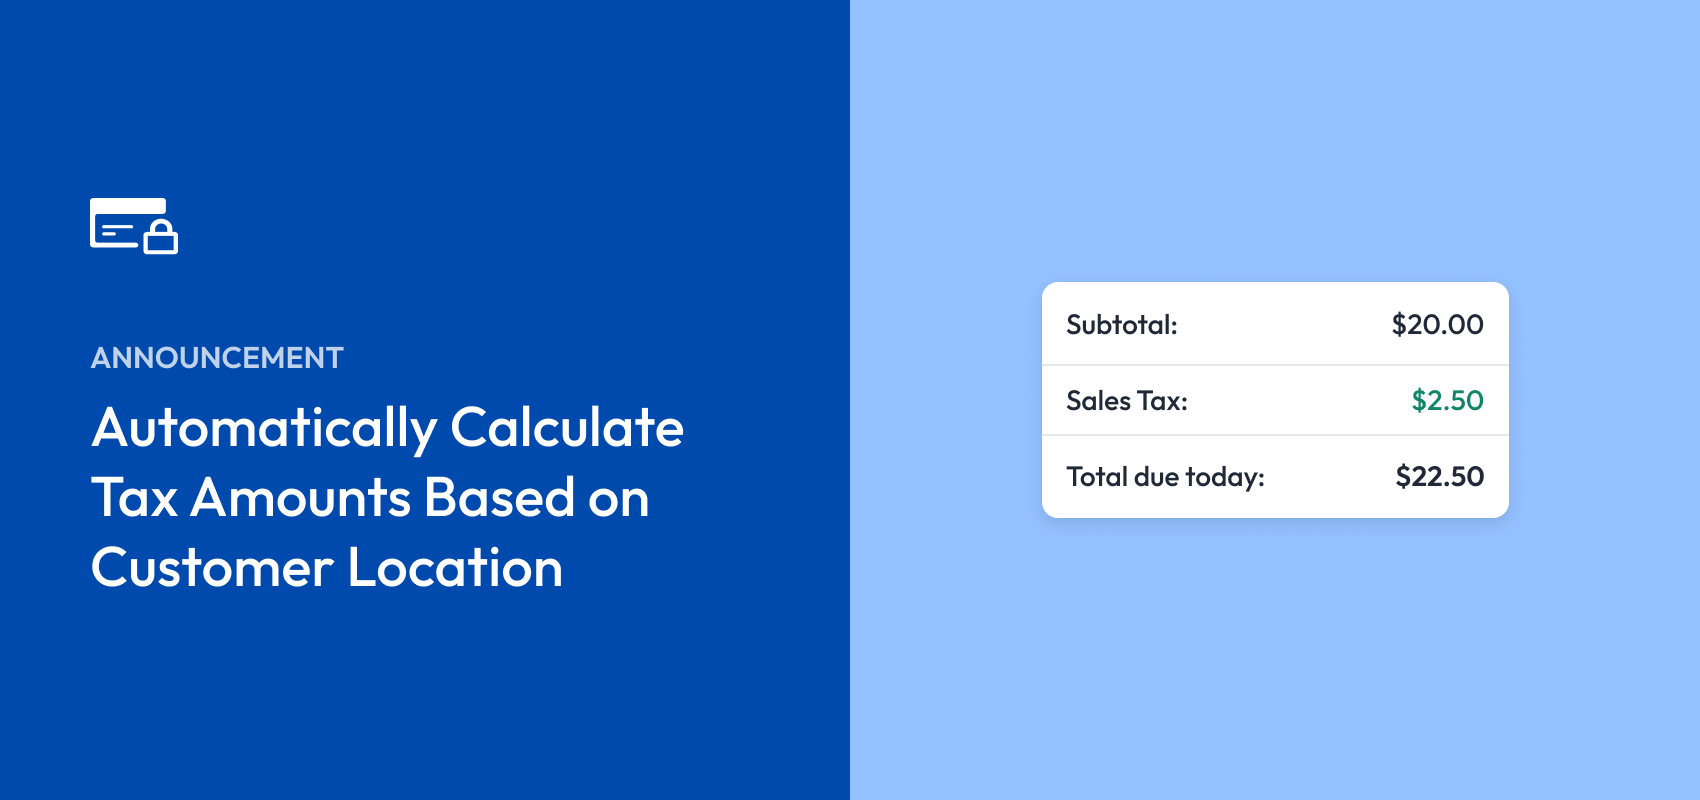 [Announcement] Now Automatically Calculate Tax Amounts Based on Customer Location